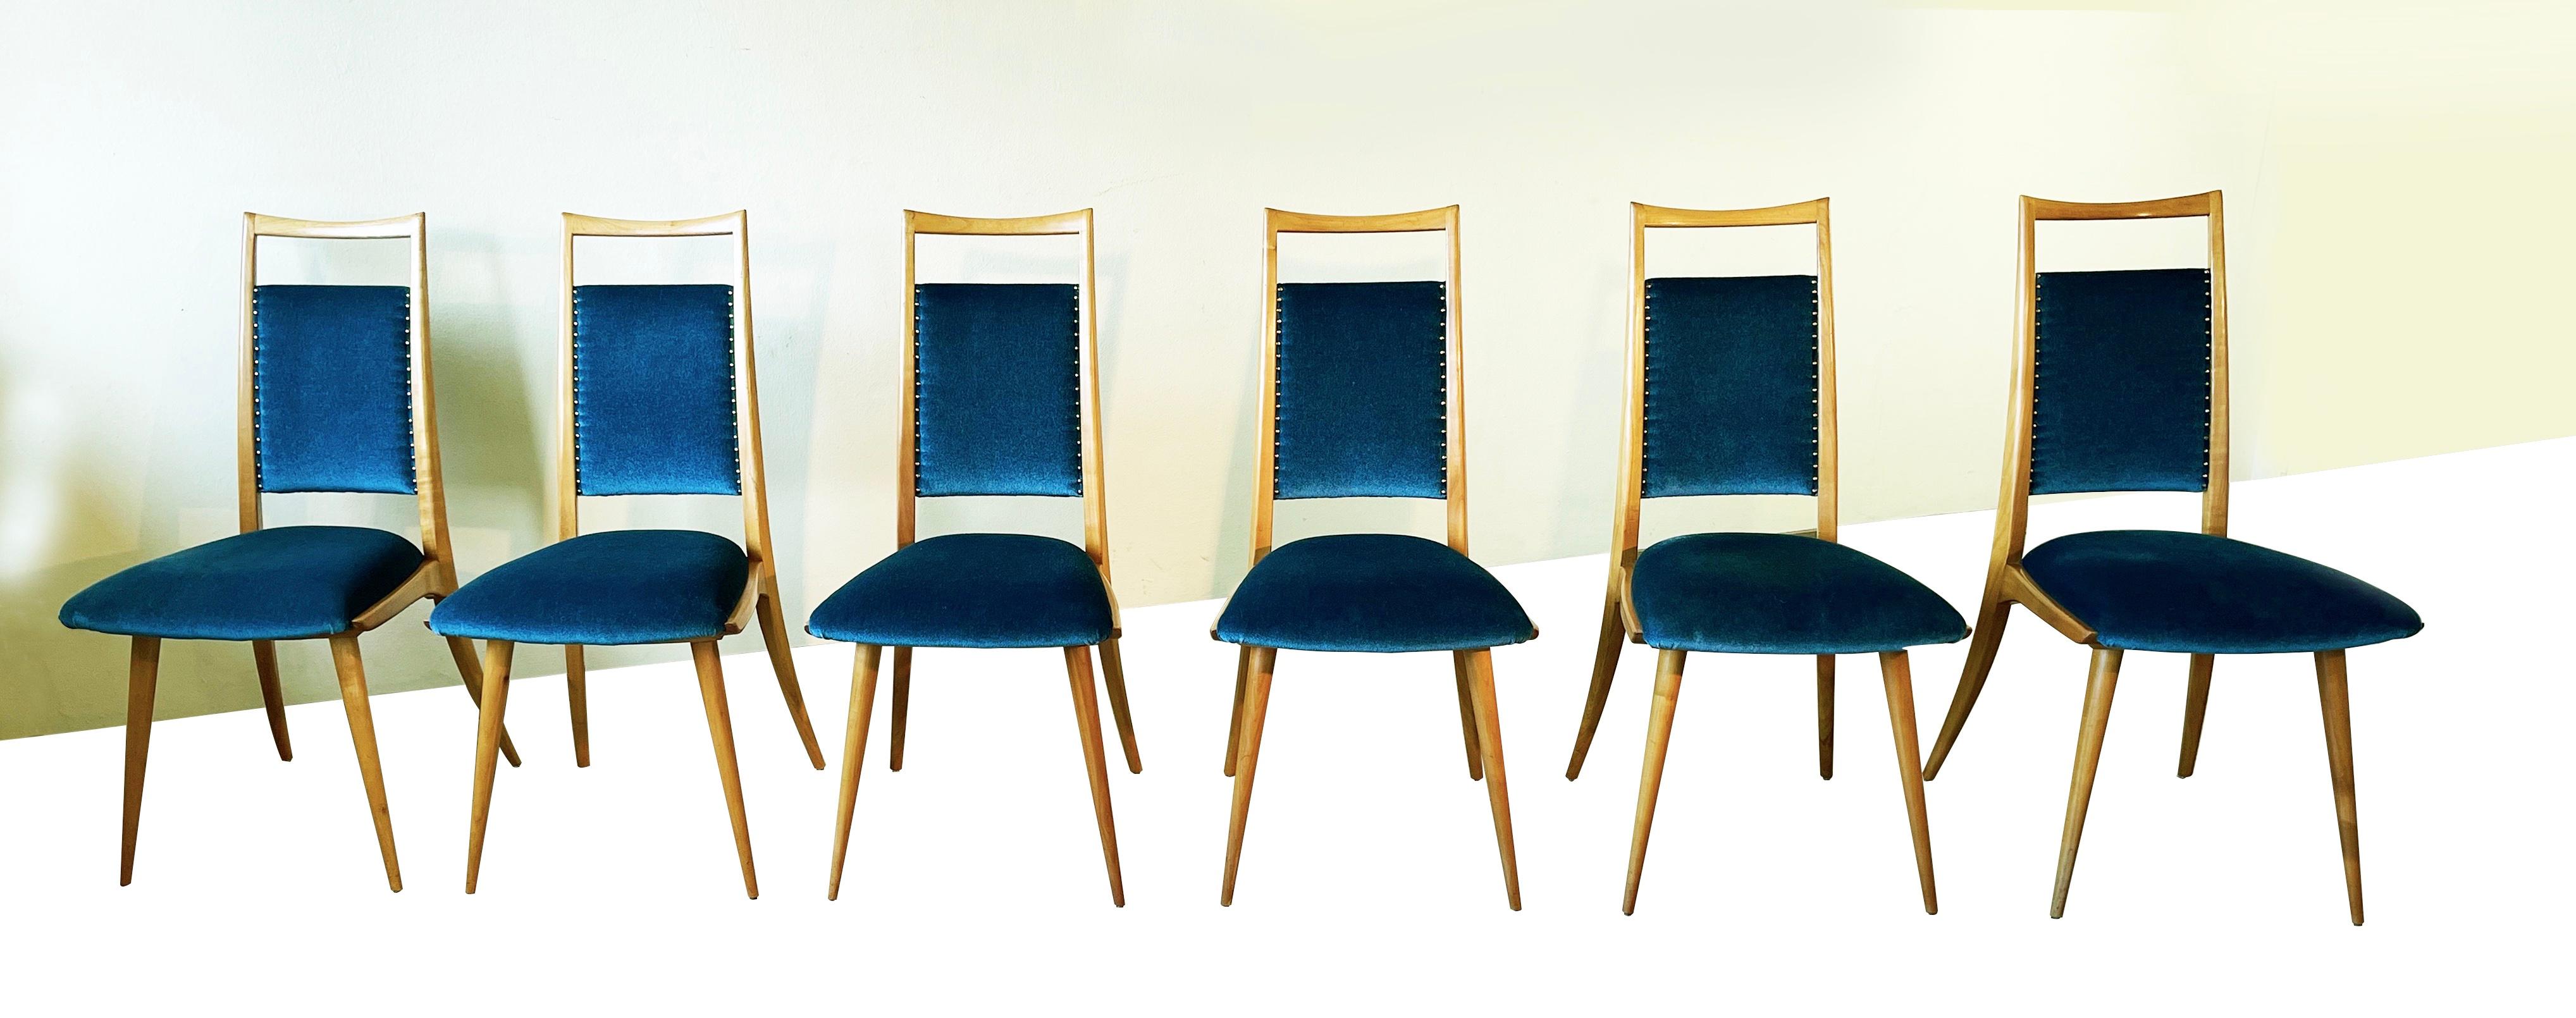 Hand-Crafted Set of 6 Mid Century Dining Chairs, Turquoise Velvet by Dettinger, Germany For Sale